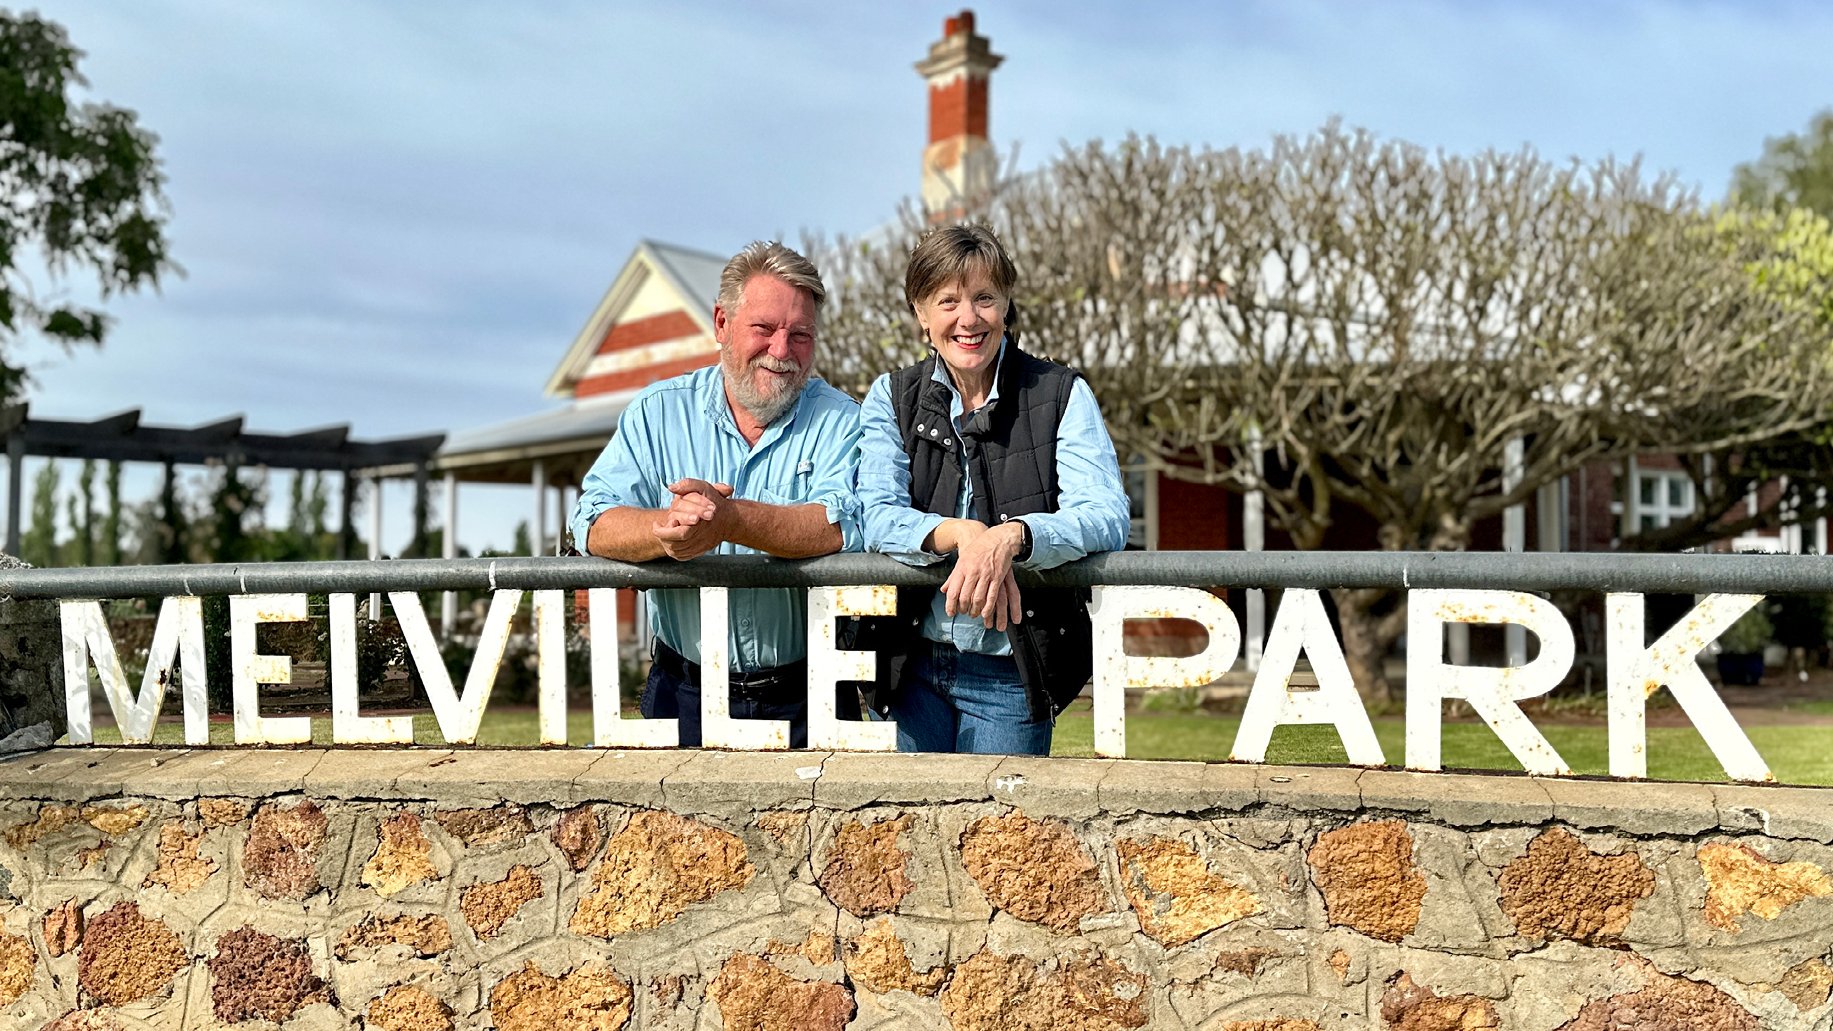 Custodians David and Barbara stand outside the Melville Park homestead.